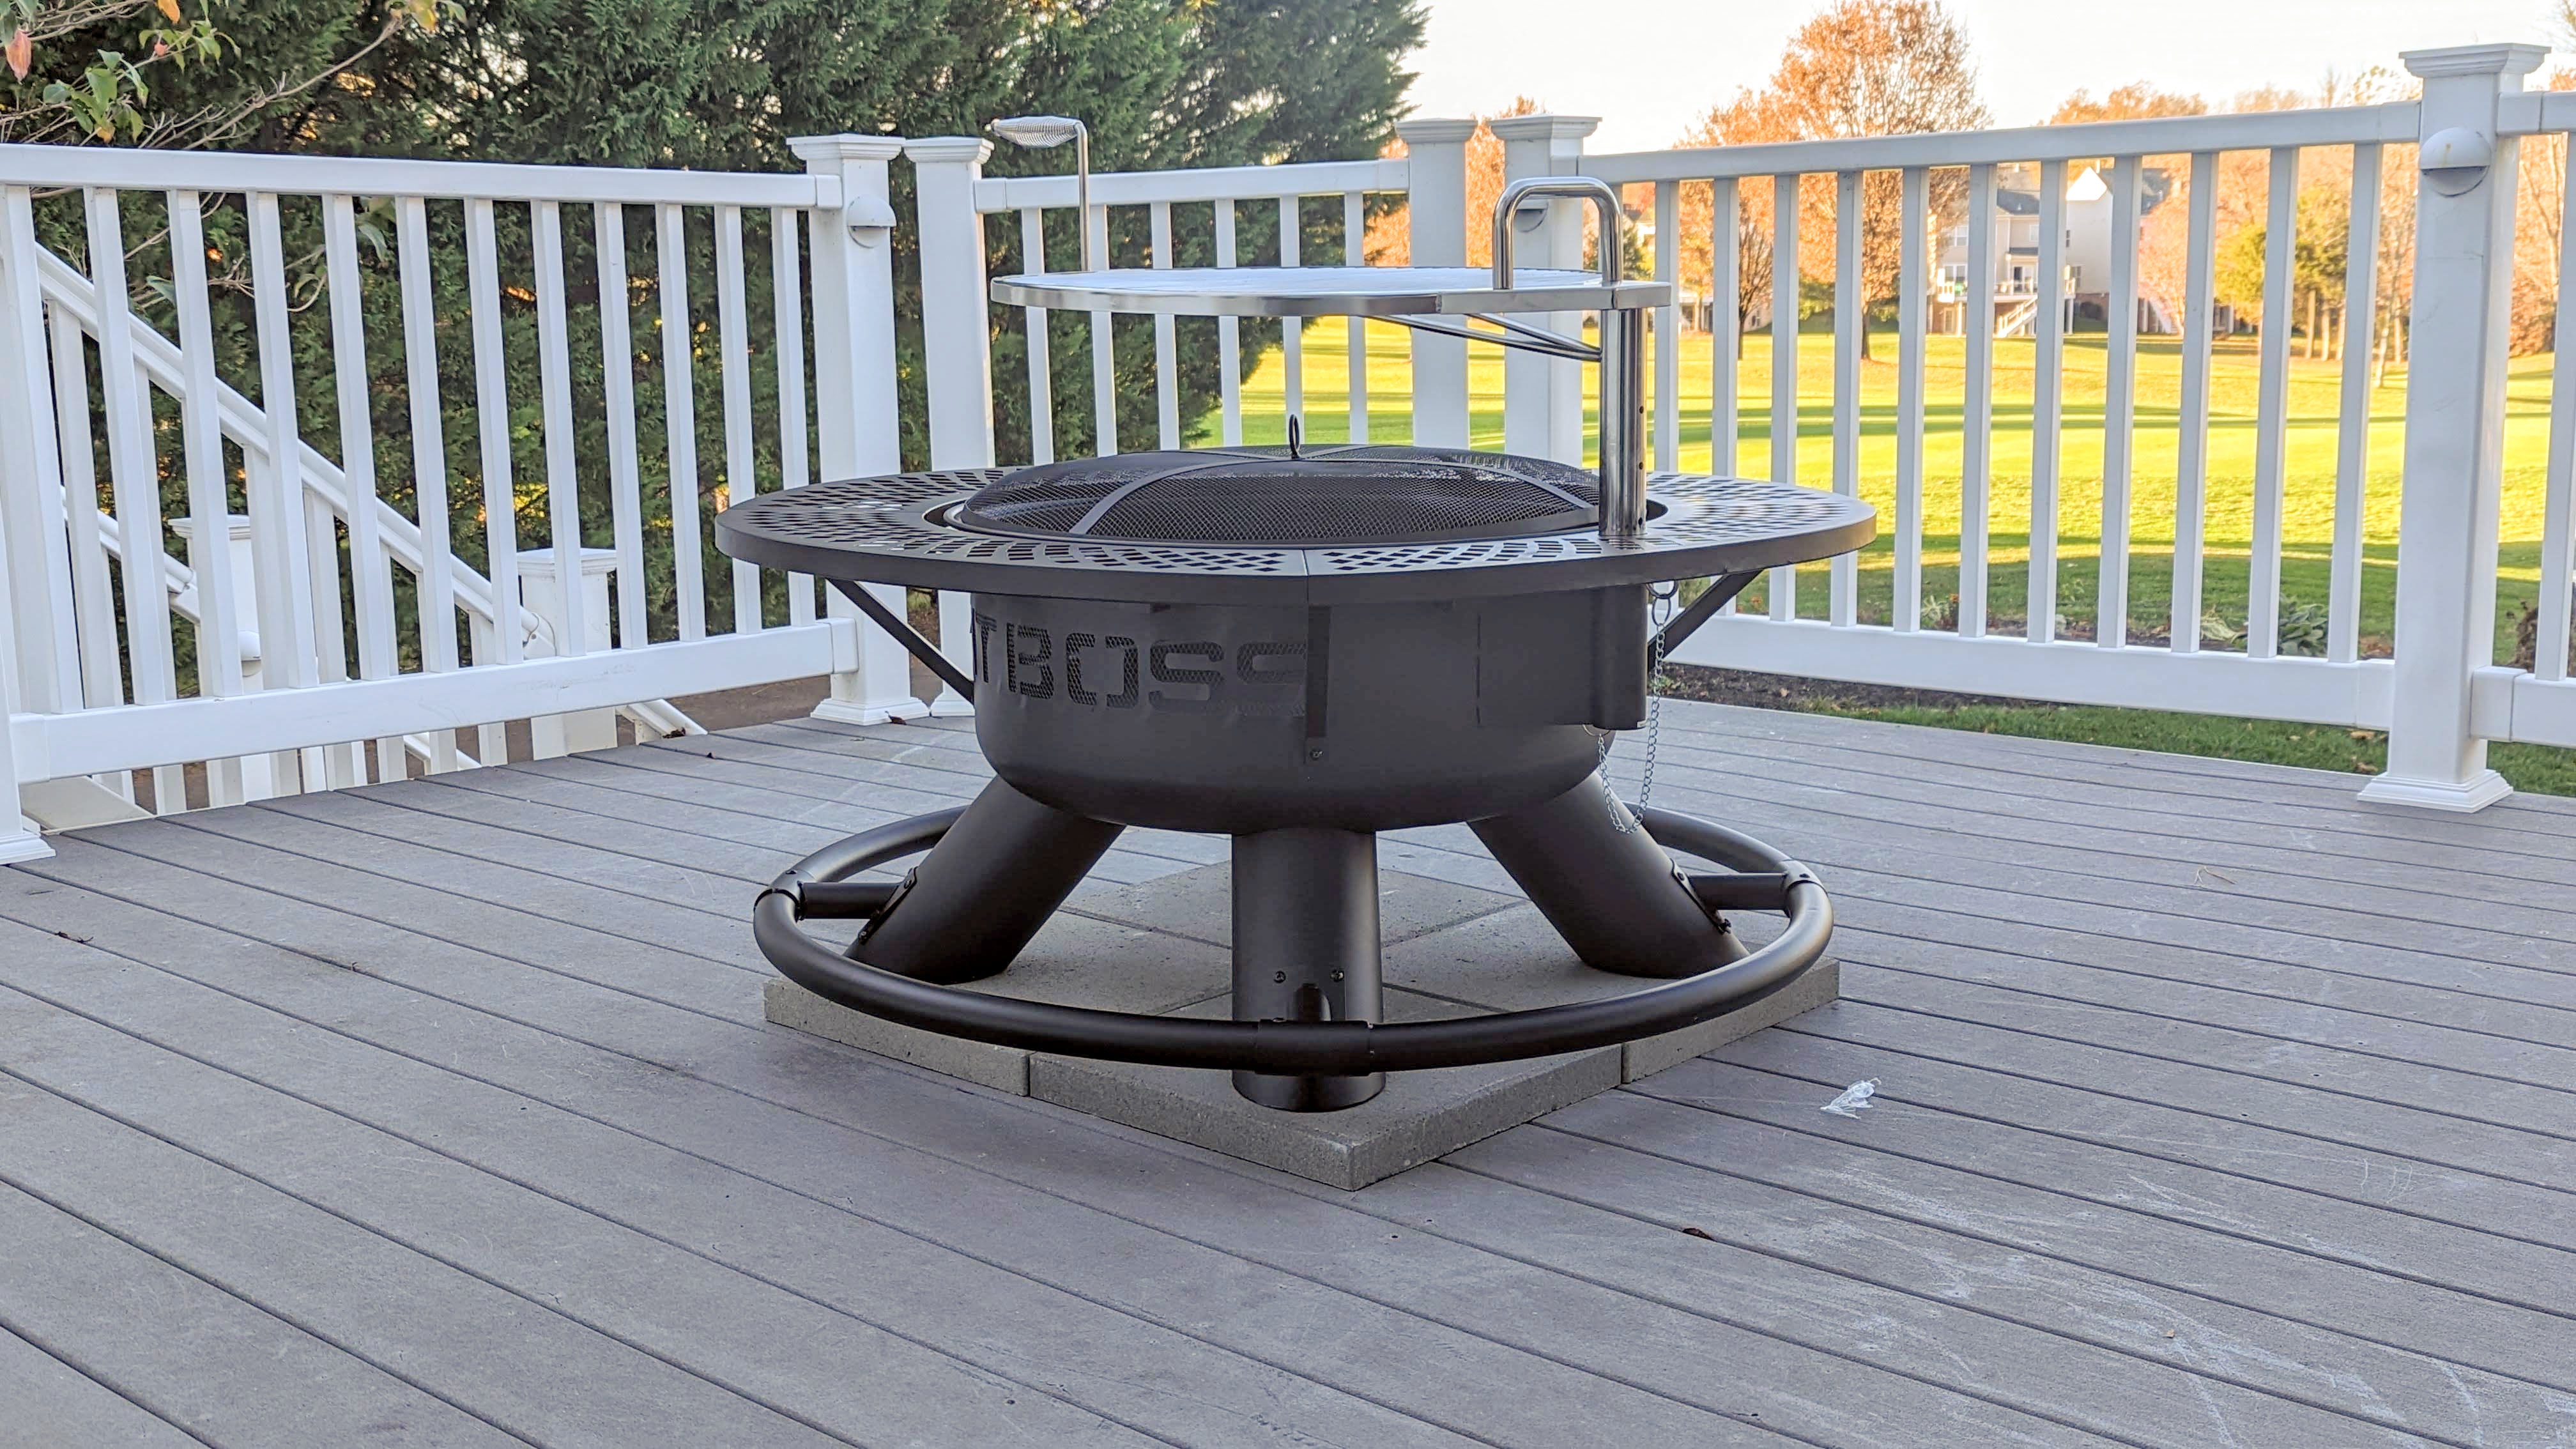 Prime Daily Deals: Discounts on Blowers, Pressure Washers, Fire Pits  and More